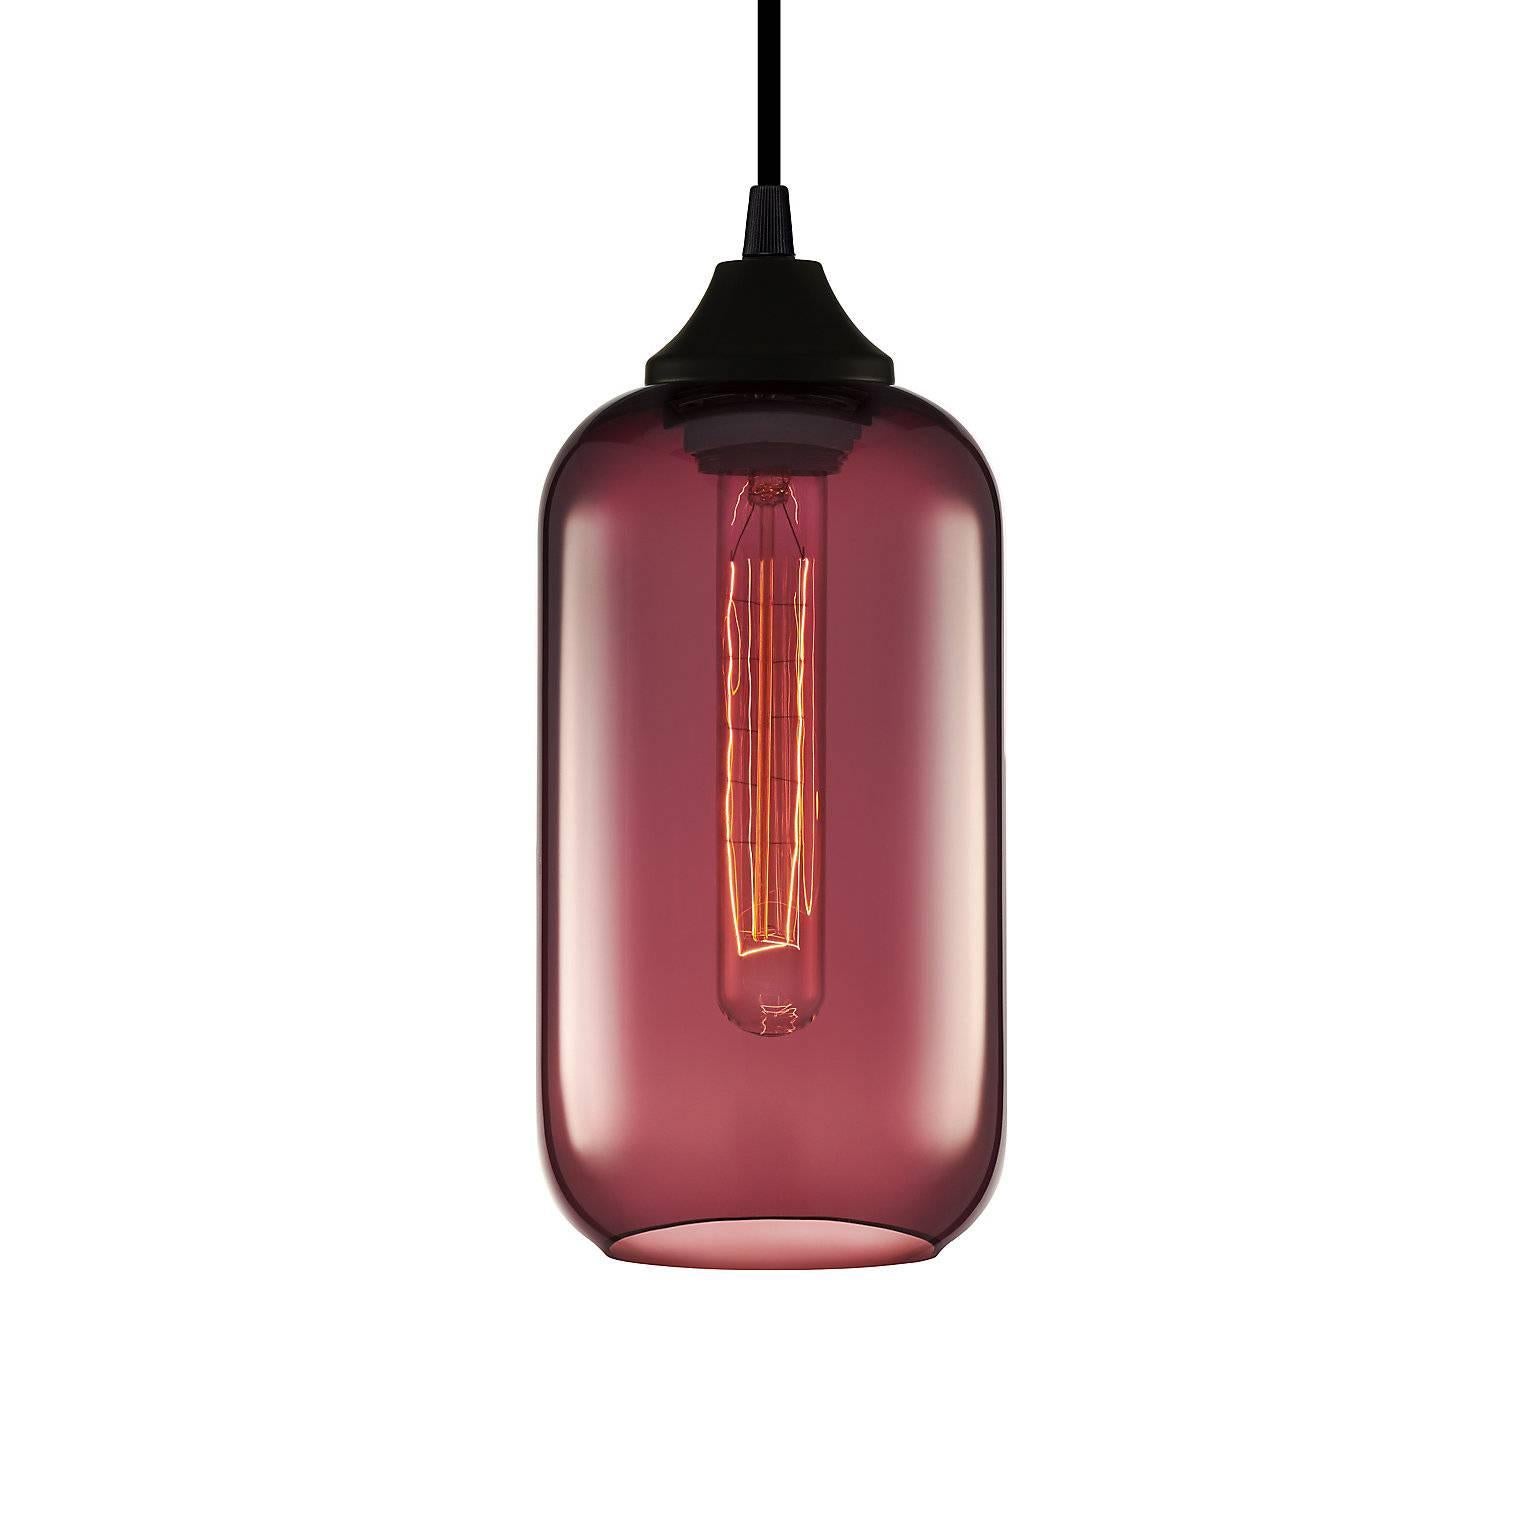 American Helio Prisma Crystal Handblown Modern Glass Pendant Light, Made in the USA For Sale